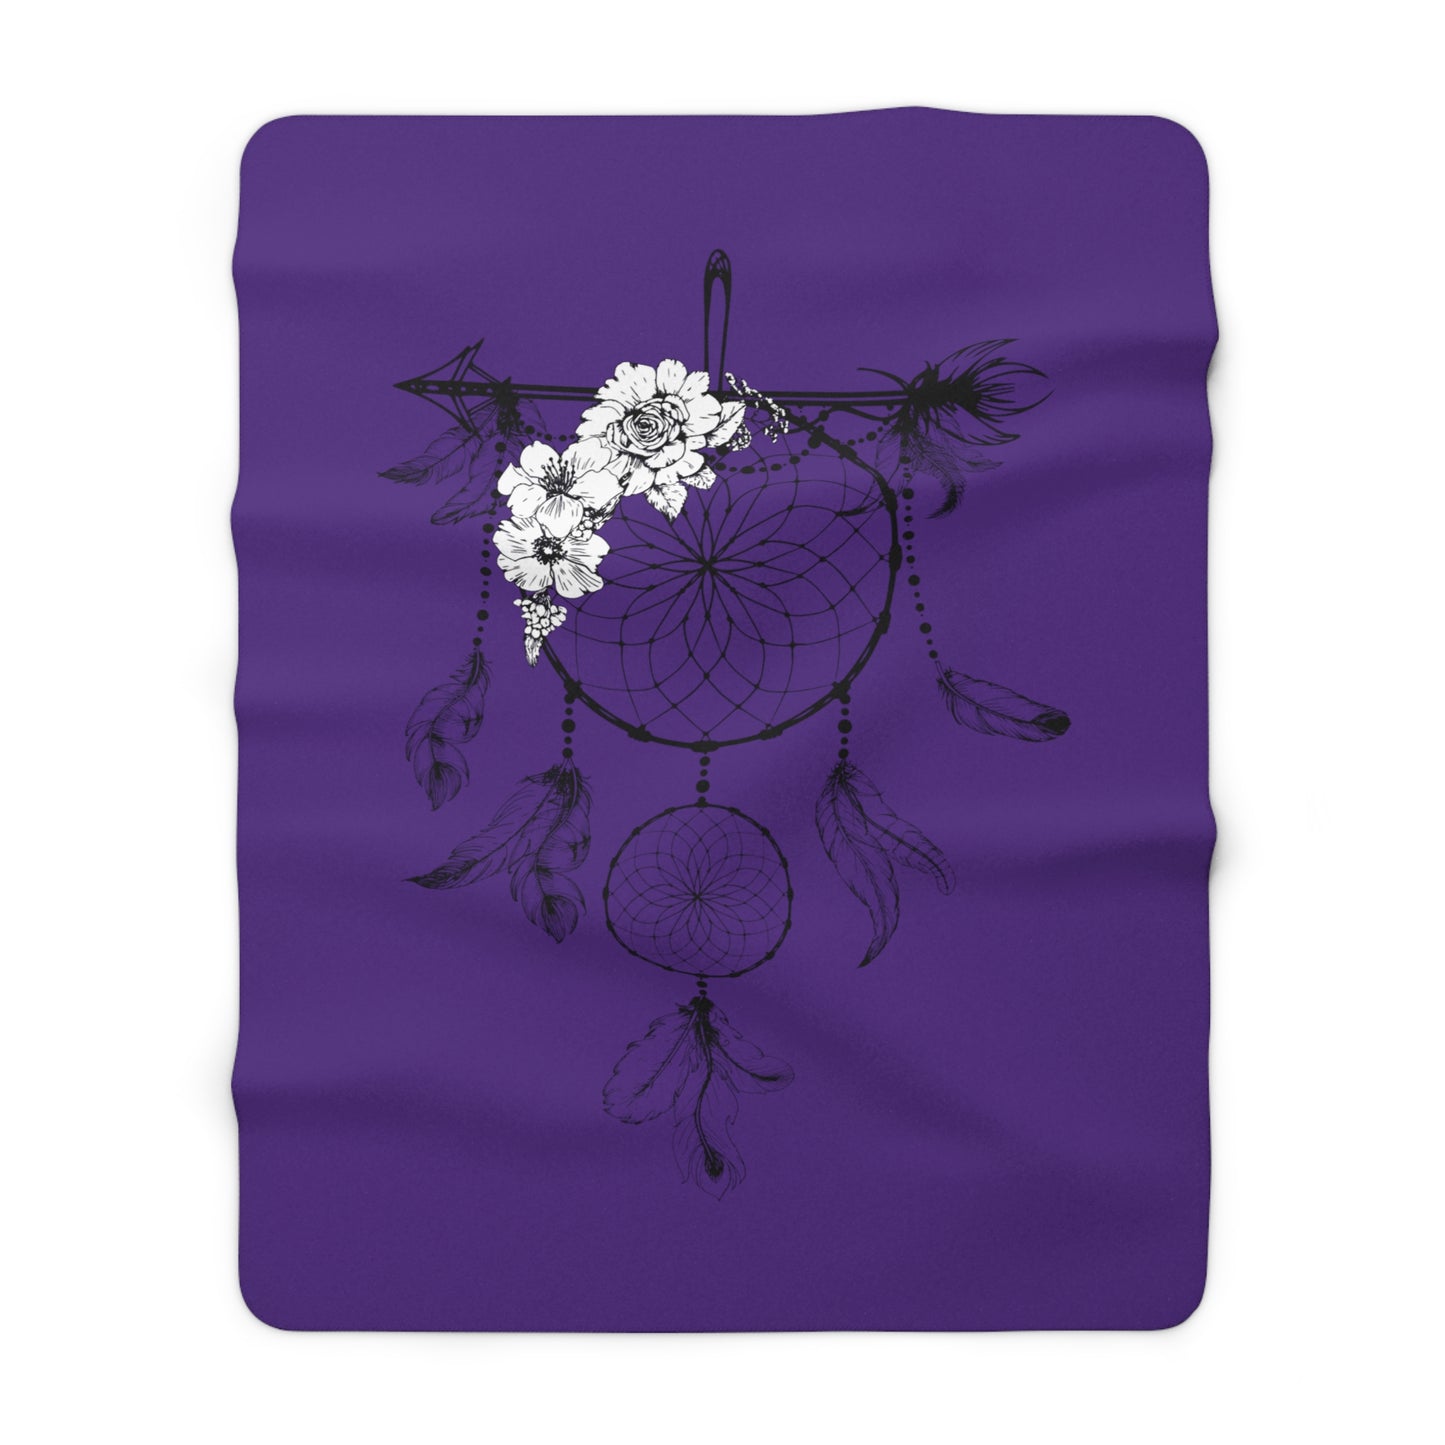 LUXURIOUS COZY BLANKET: THE EPITOME OF COMFORT AND WARMTH | Dream Catcher2 Violet 